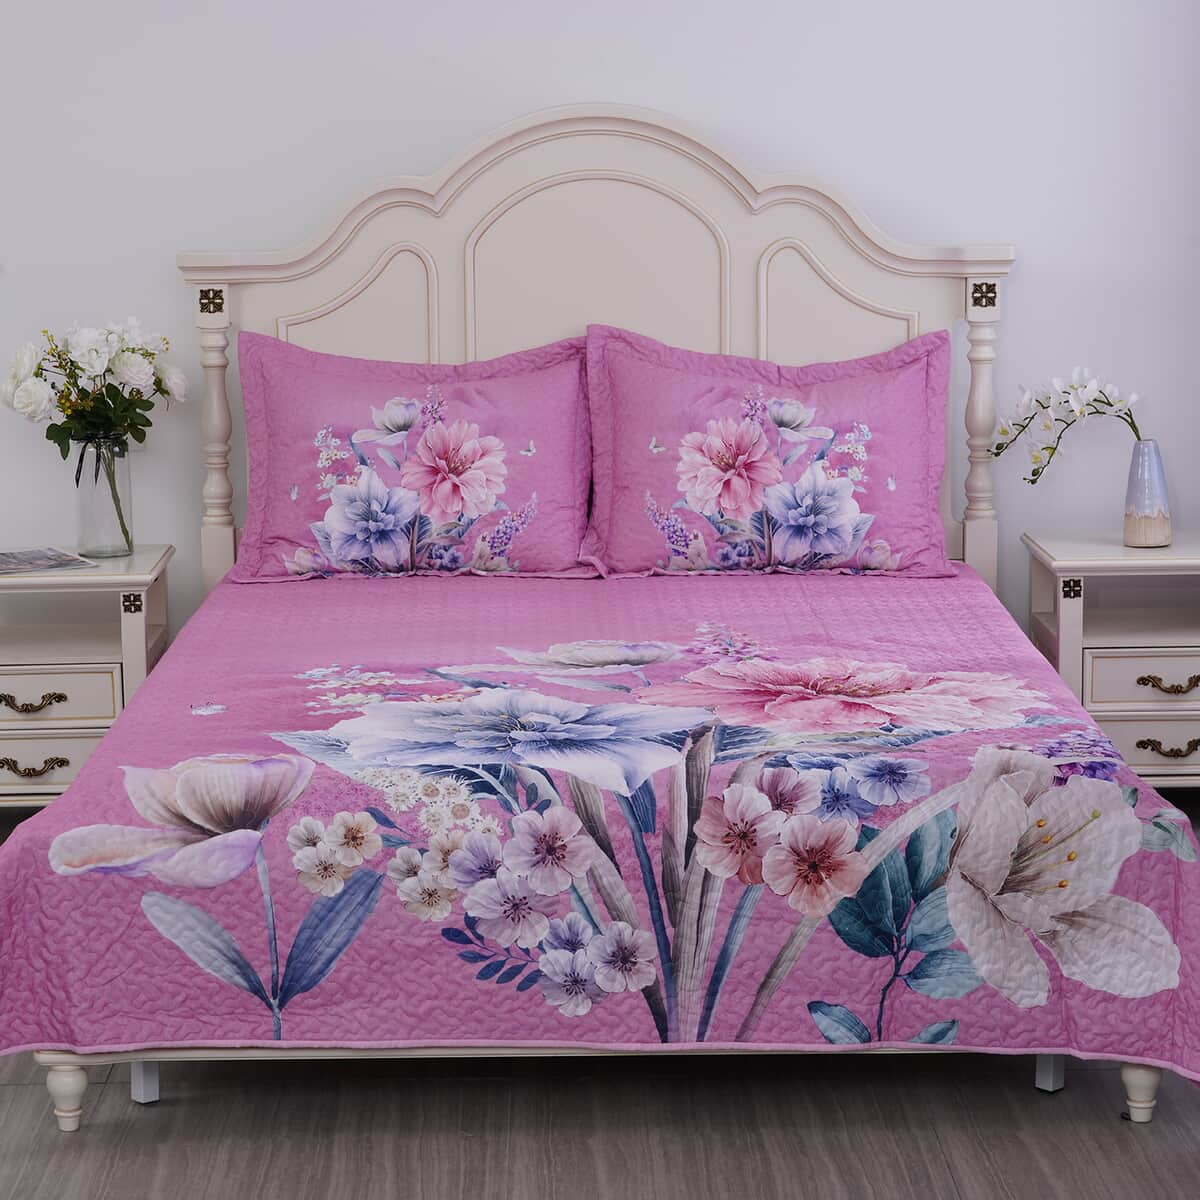 Homesmart Pink Floral Digital Print 100% Microfiber Quilted Bedspread and 2 Pillow Shams - Queen image number 1